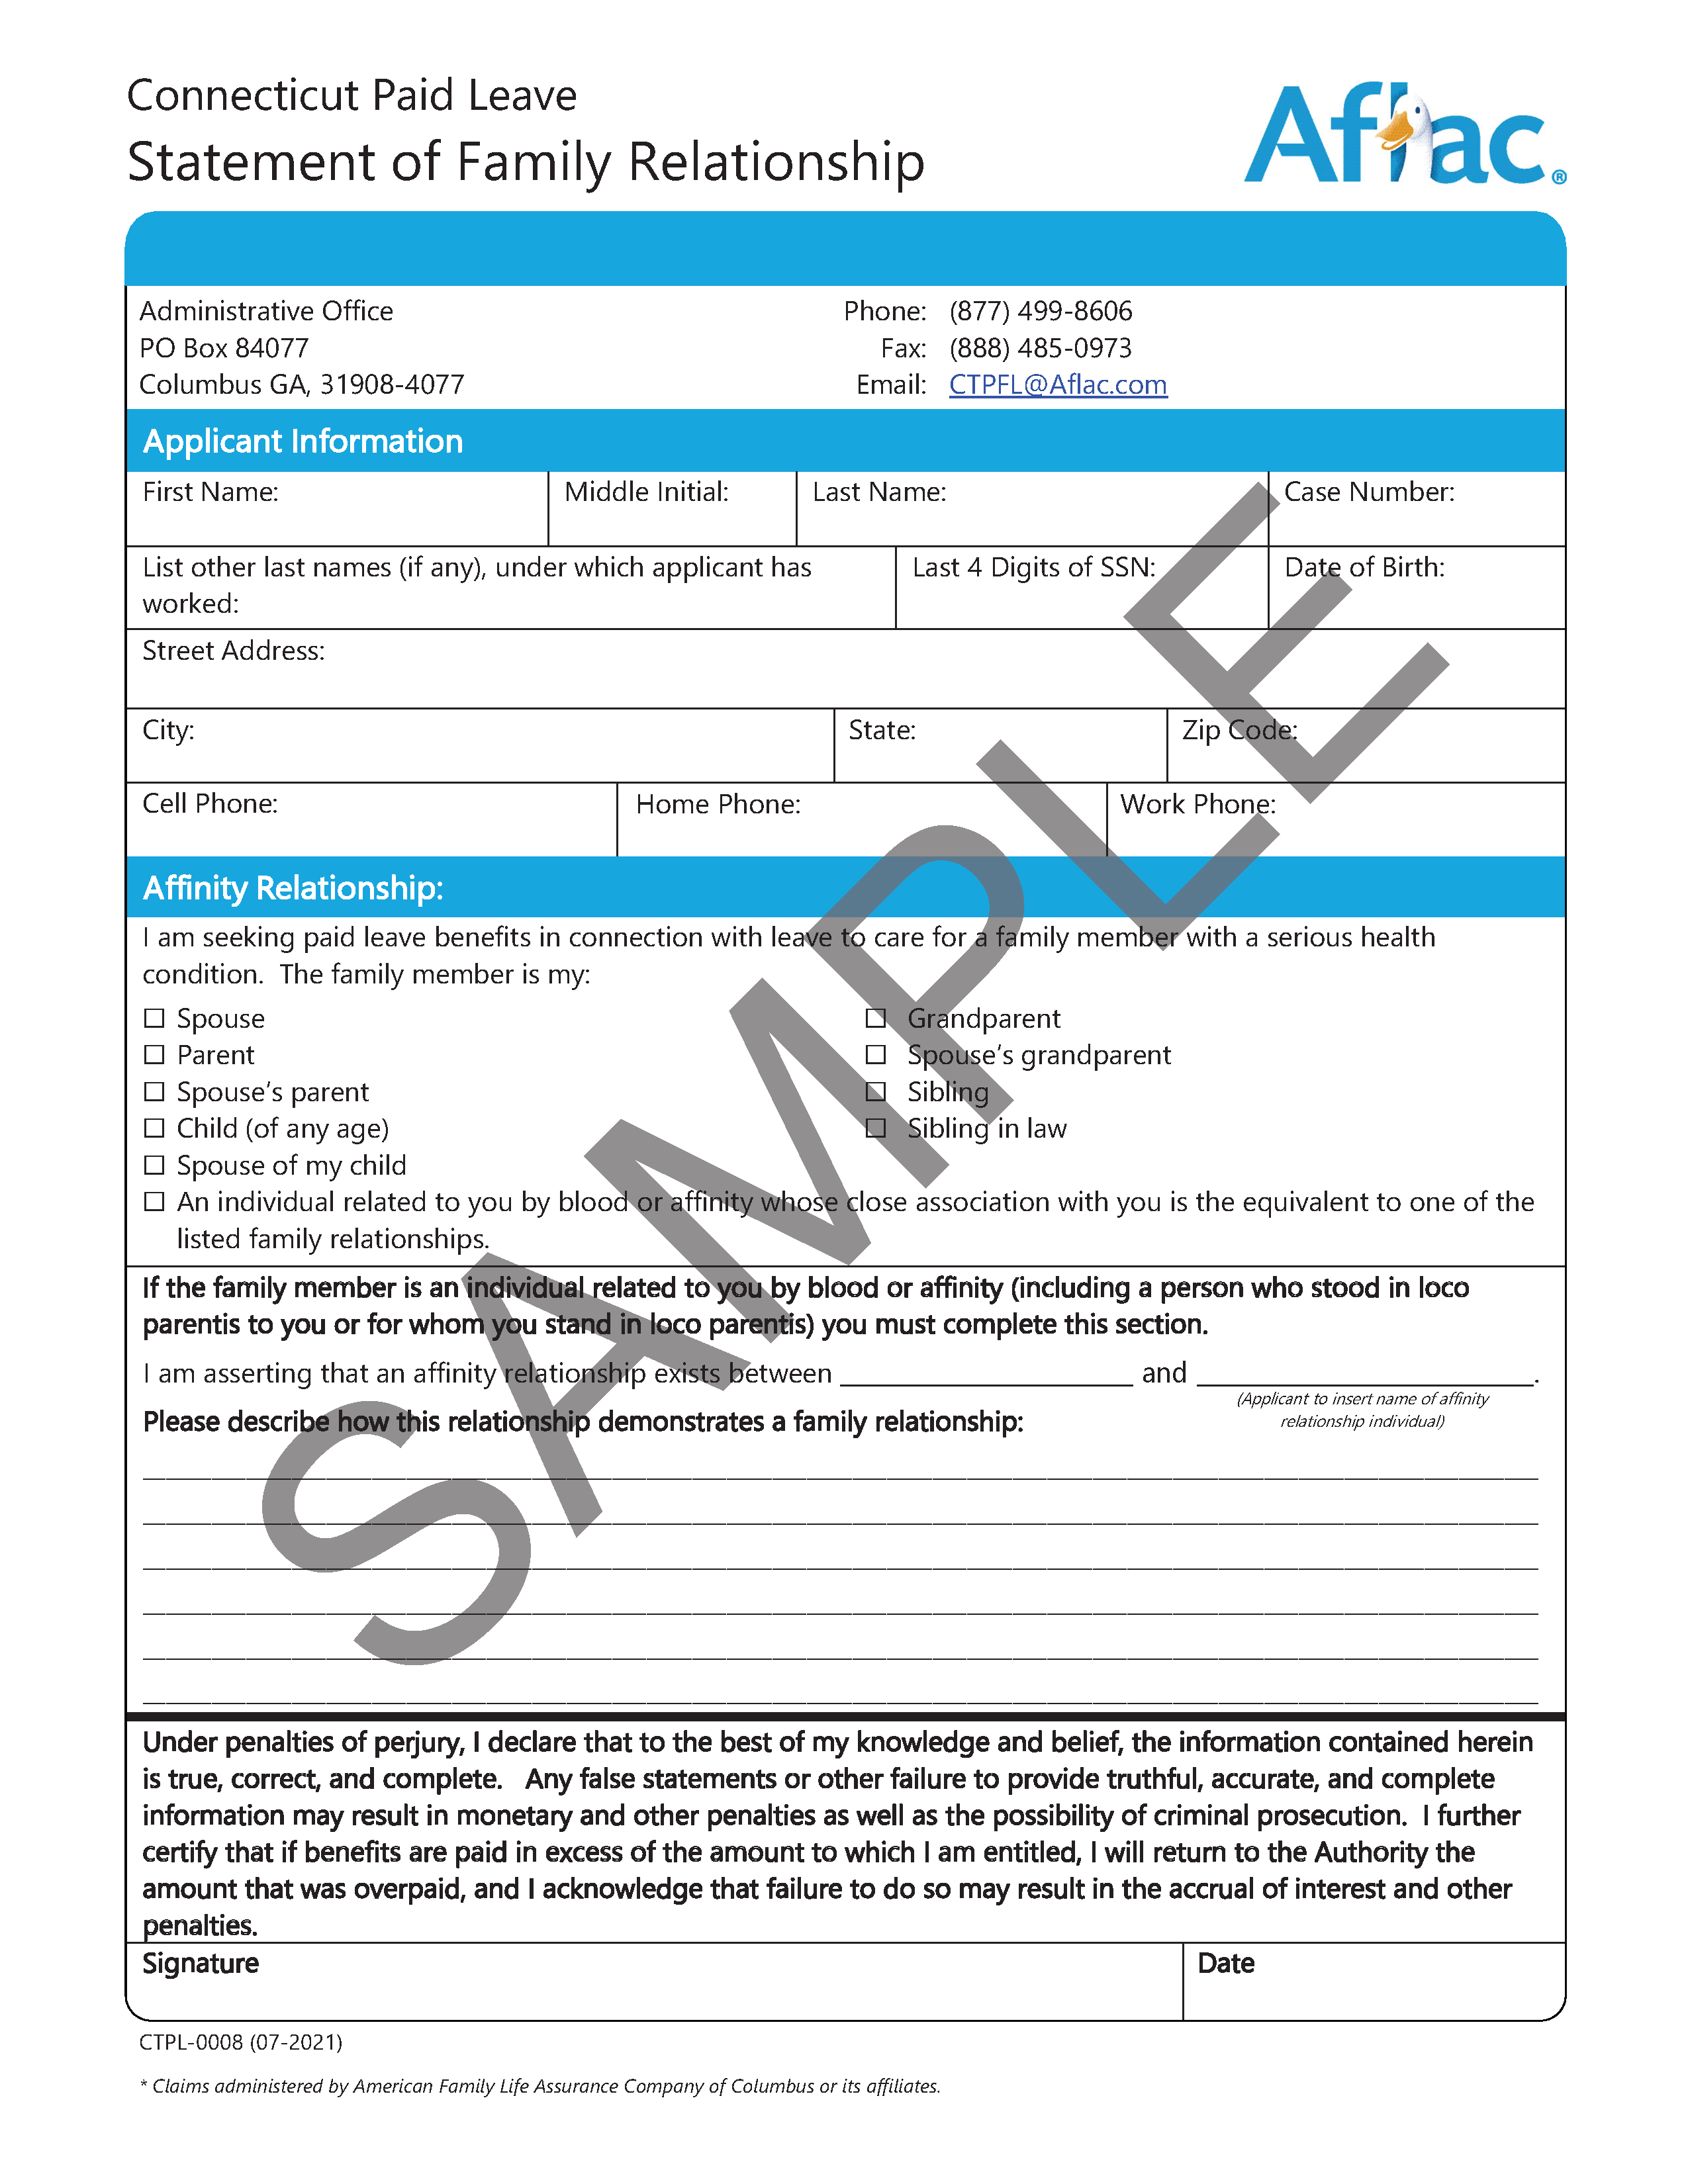 Sample Statement of Family Relationship form